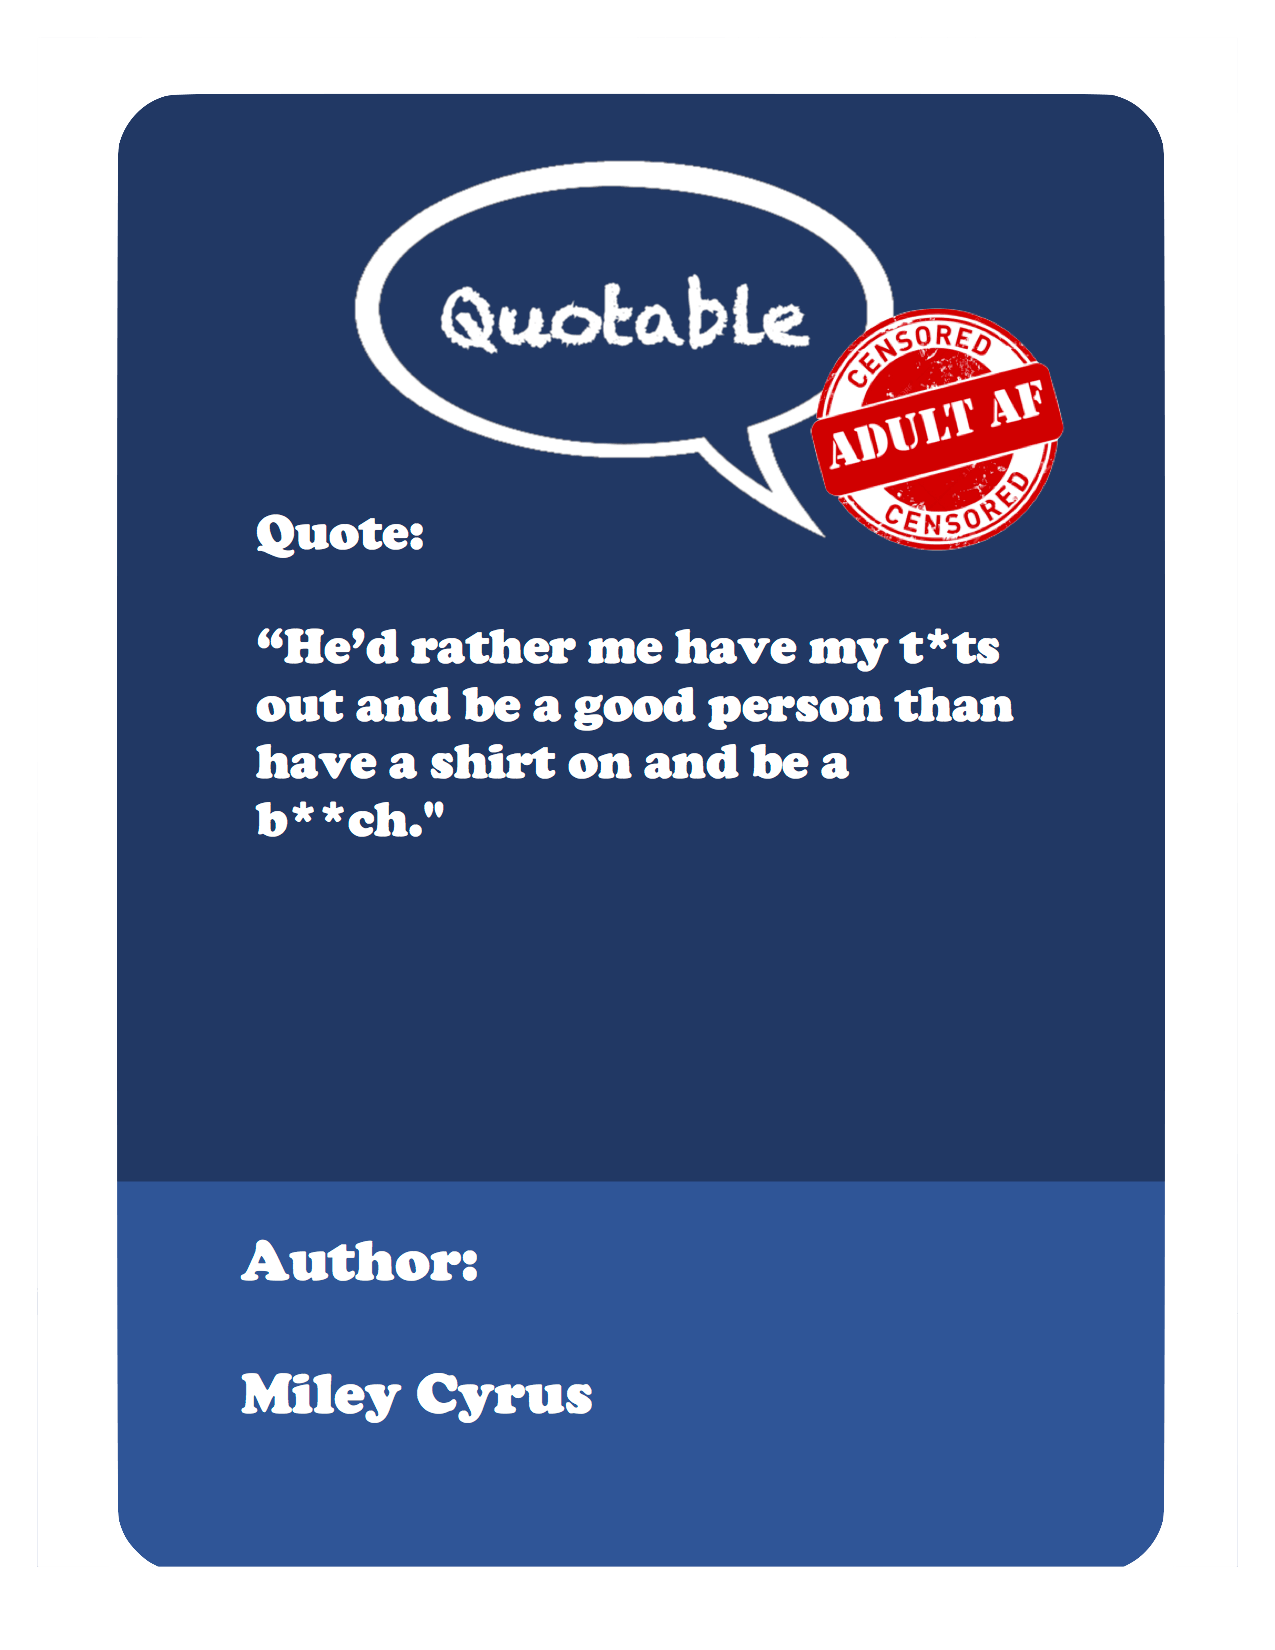 The Quotable Game media 1